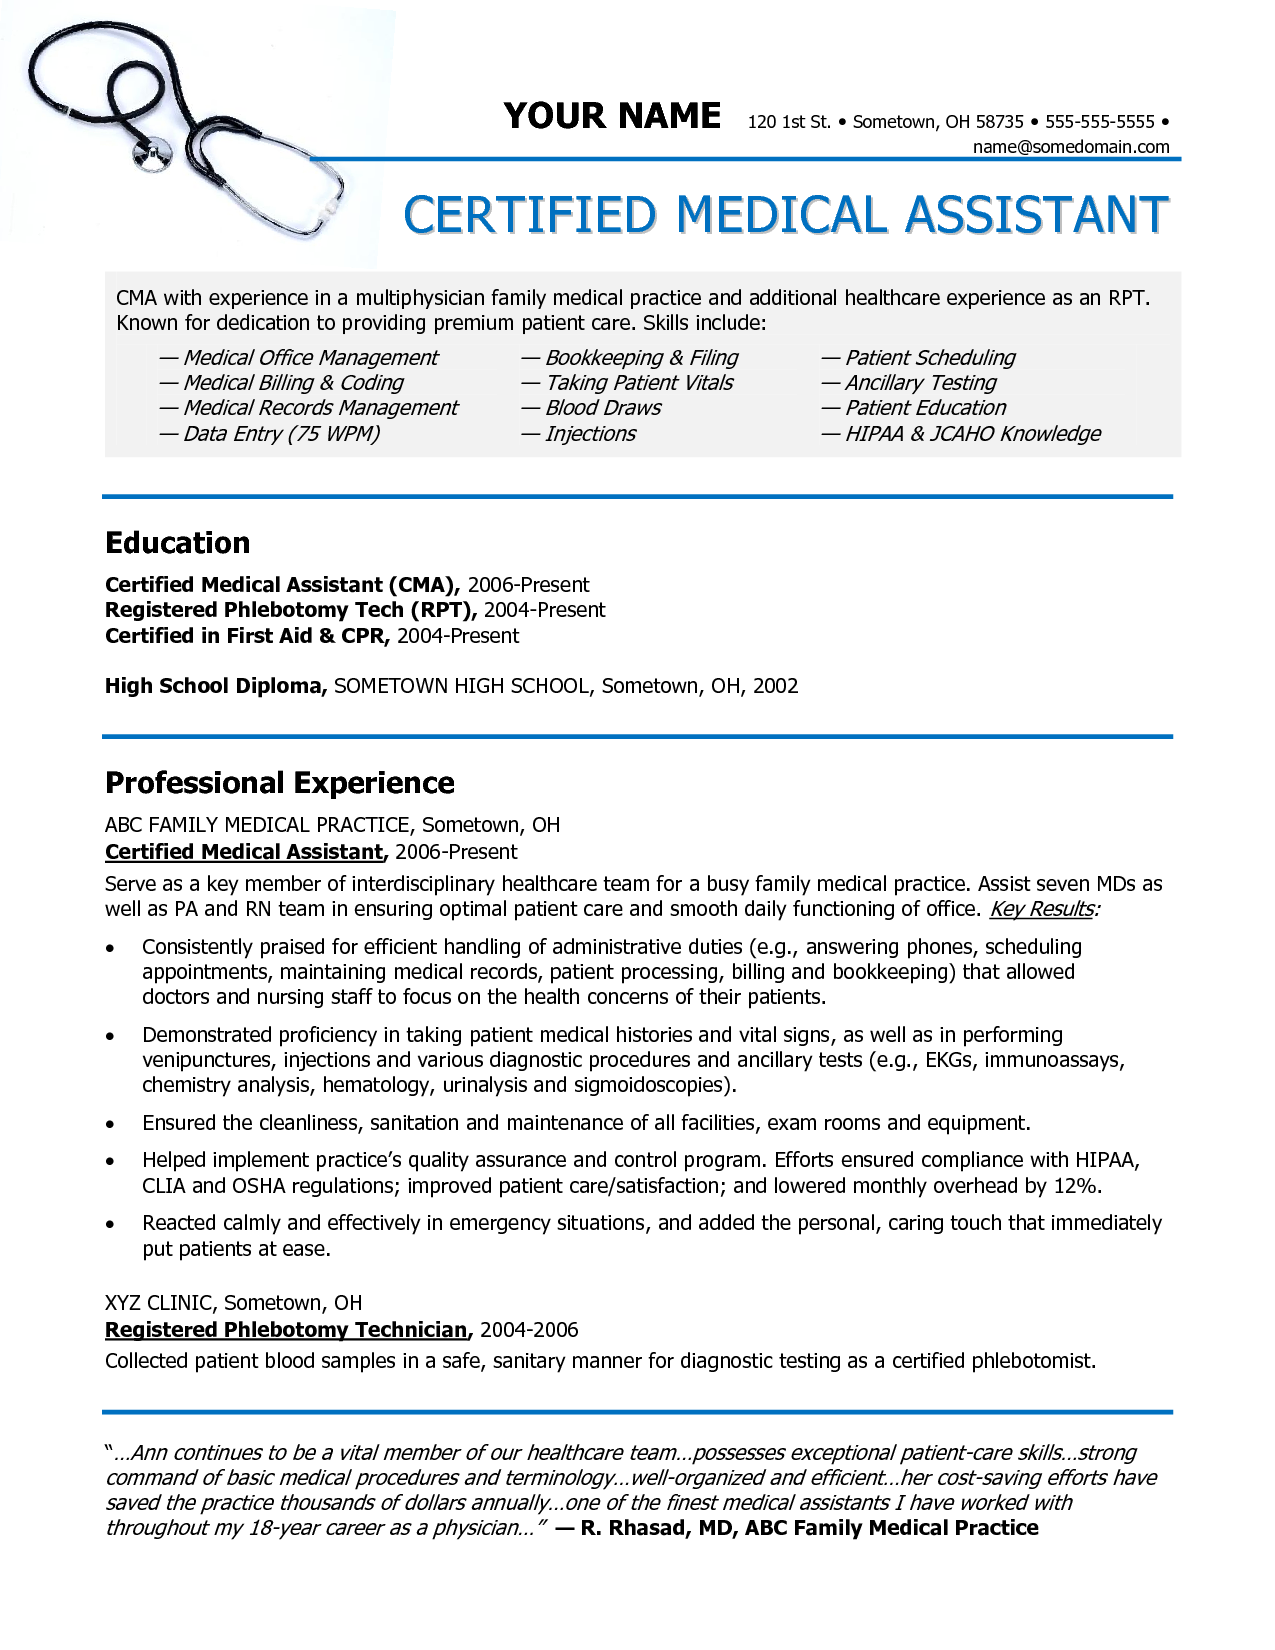 Medical Assistant Resume Examples